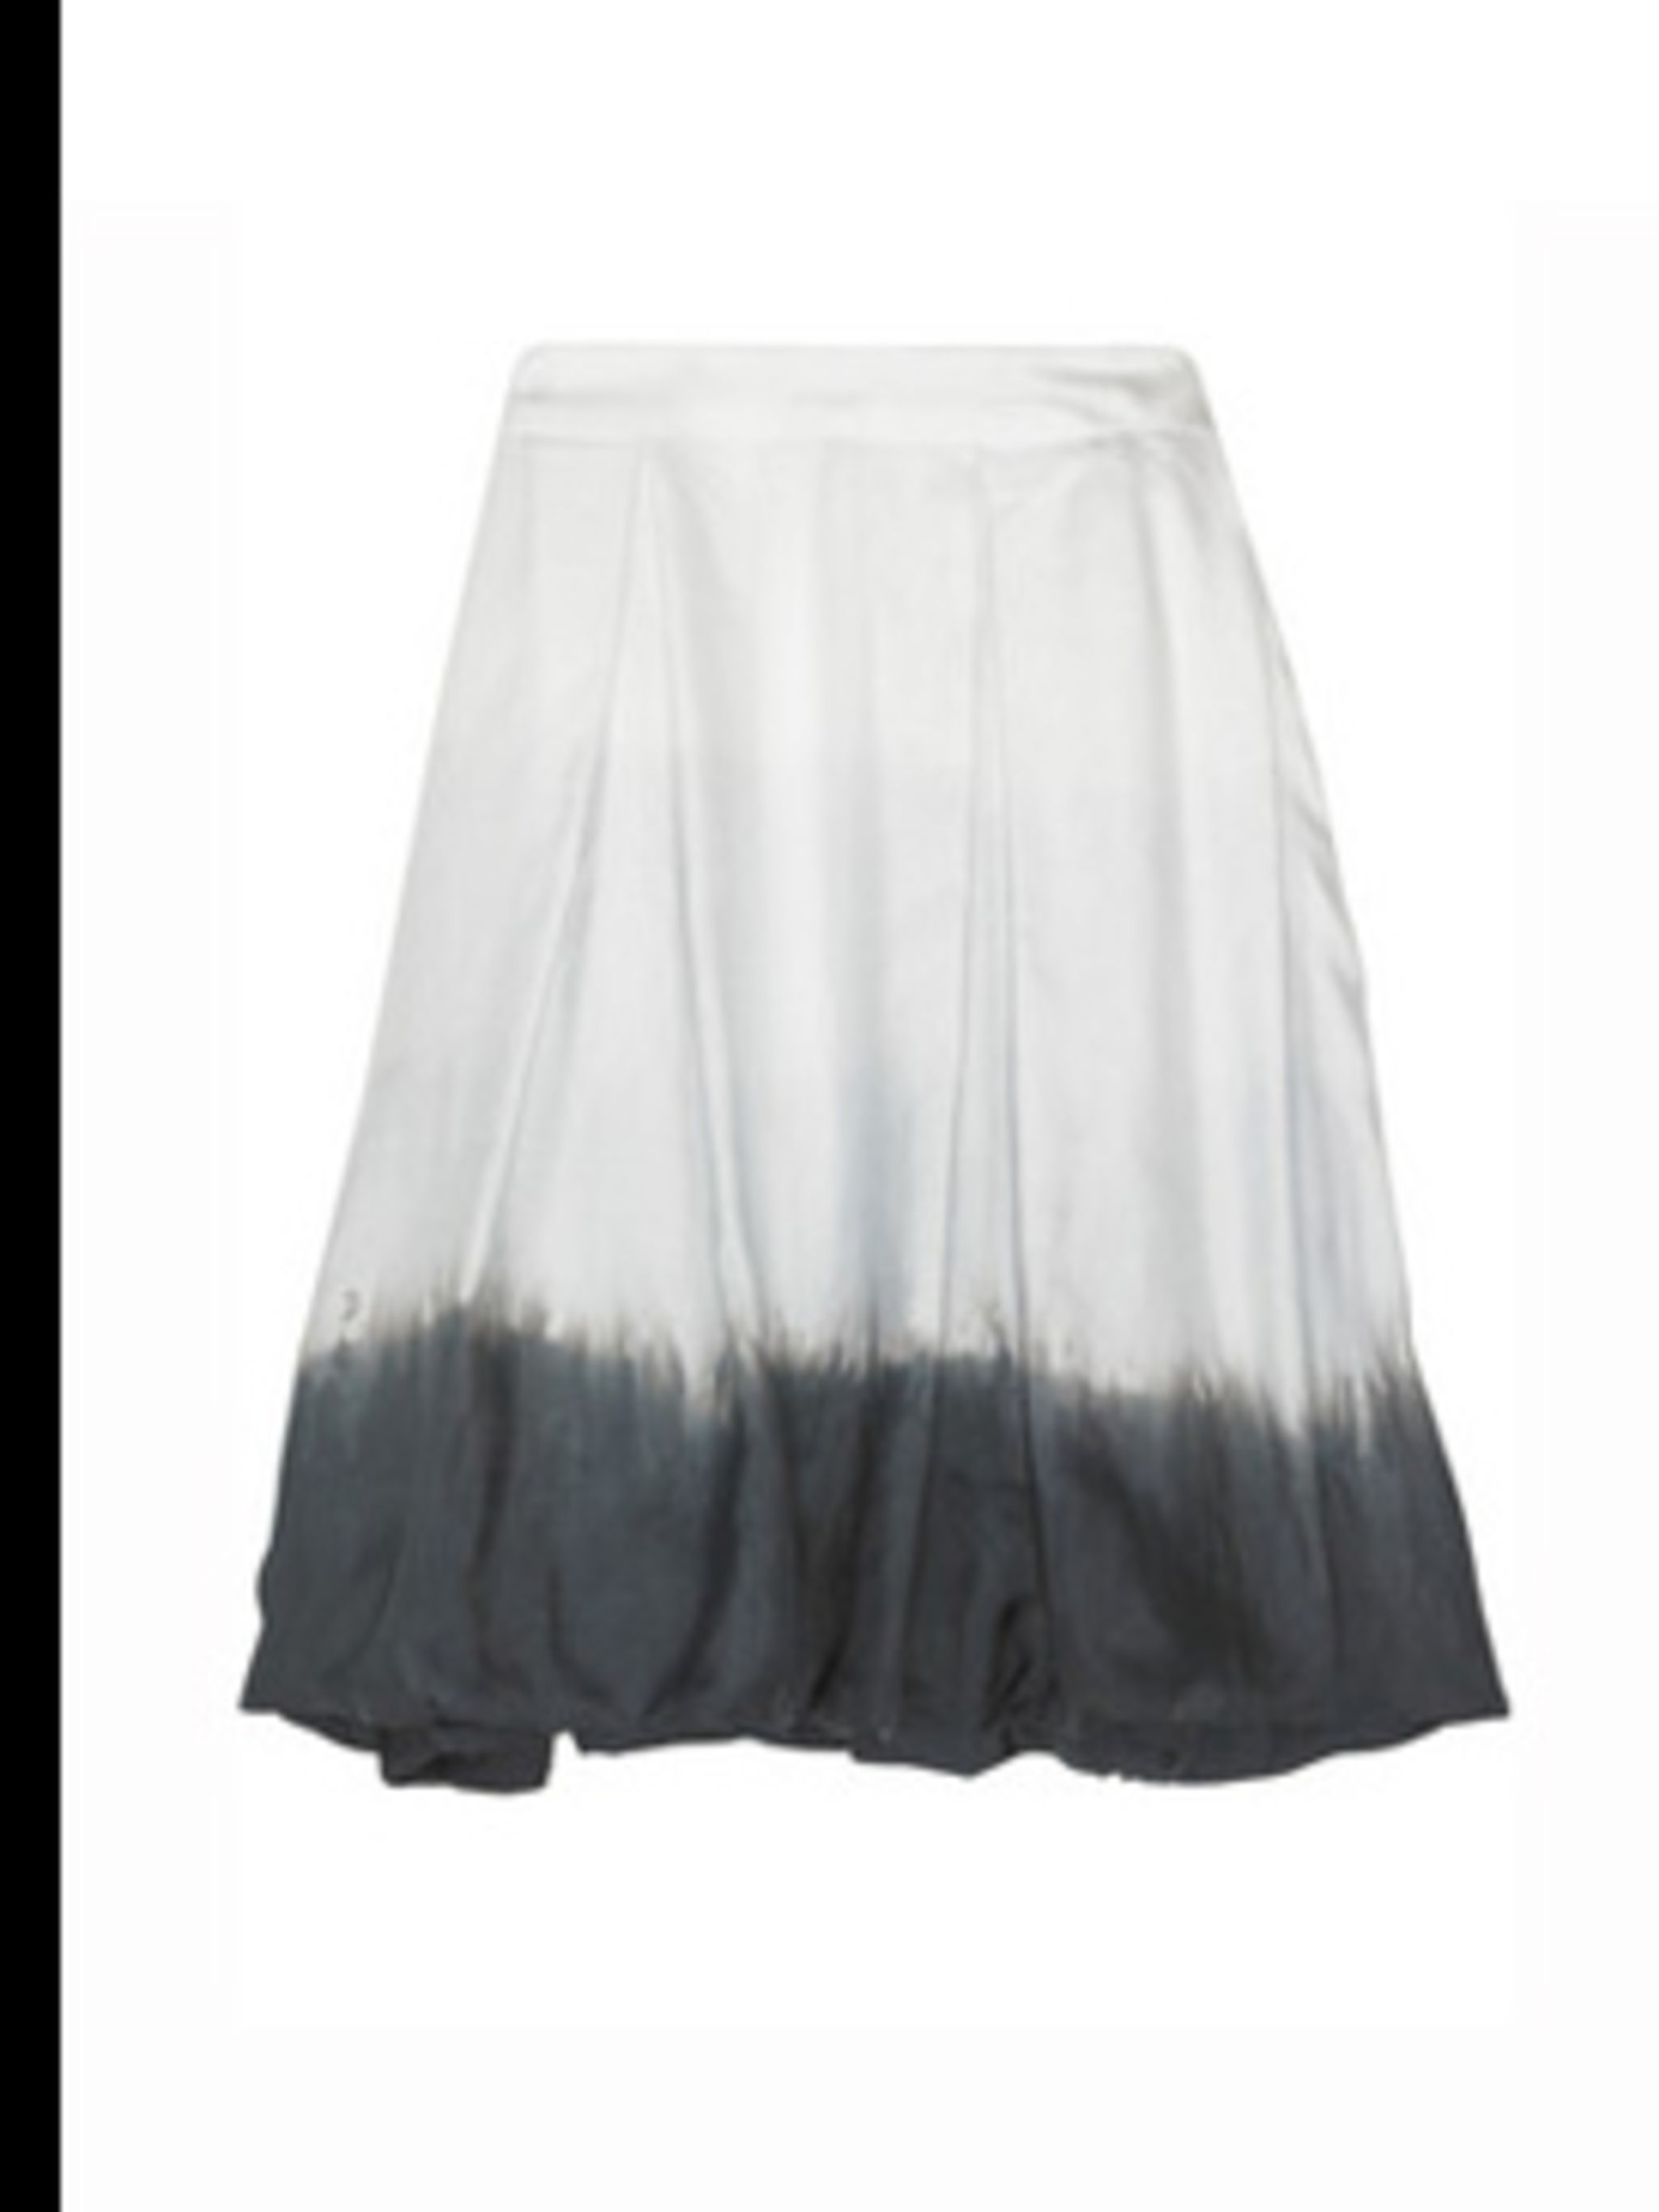 Take a peek up constricted grey petticoat